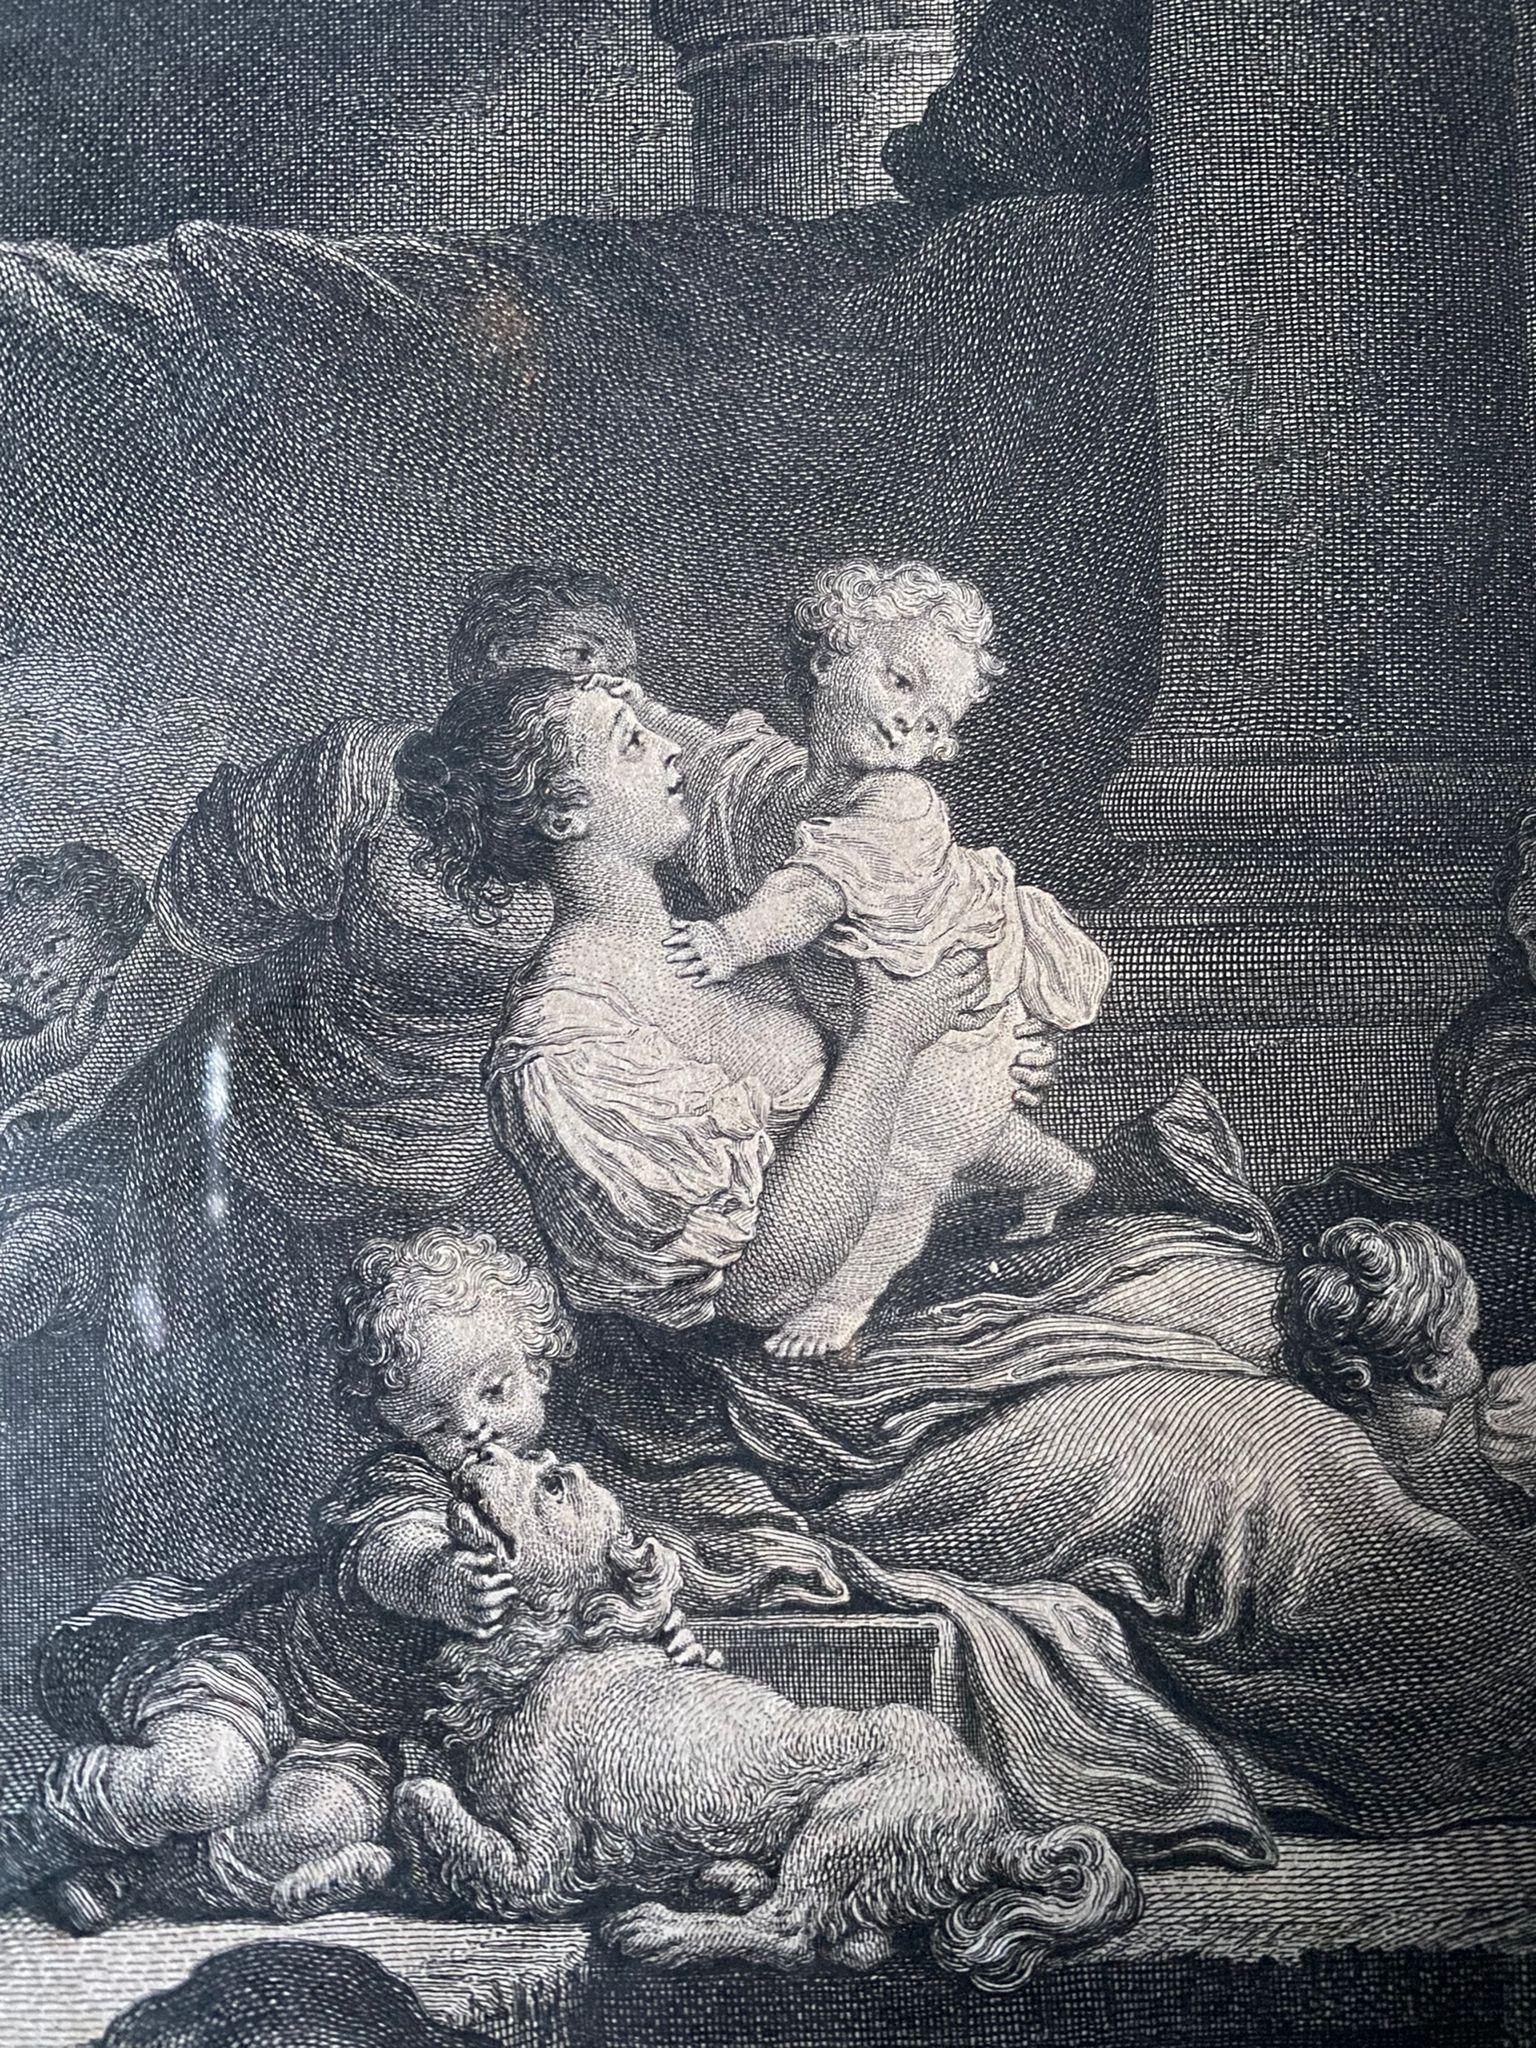 This nice engraving is made bye Nicolas Launay, after the work of Jean Honoré Fragonard. This engraving represents a painting of Fragonard visible in an architecture topped with foliage. Its represents in the foreground a woman with a child in her